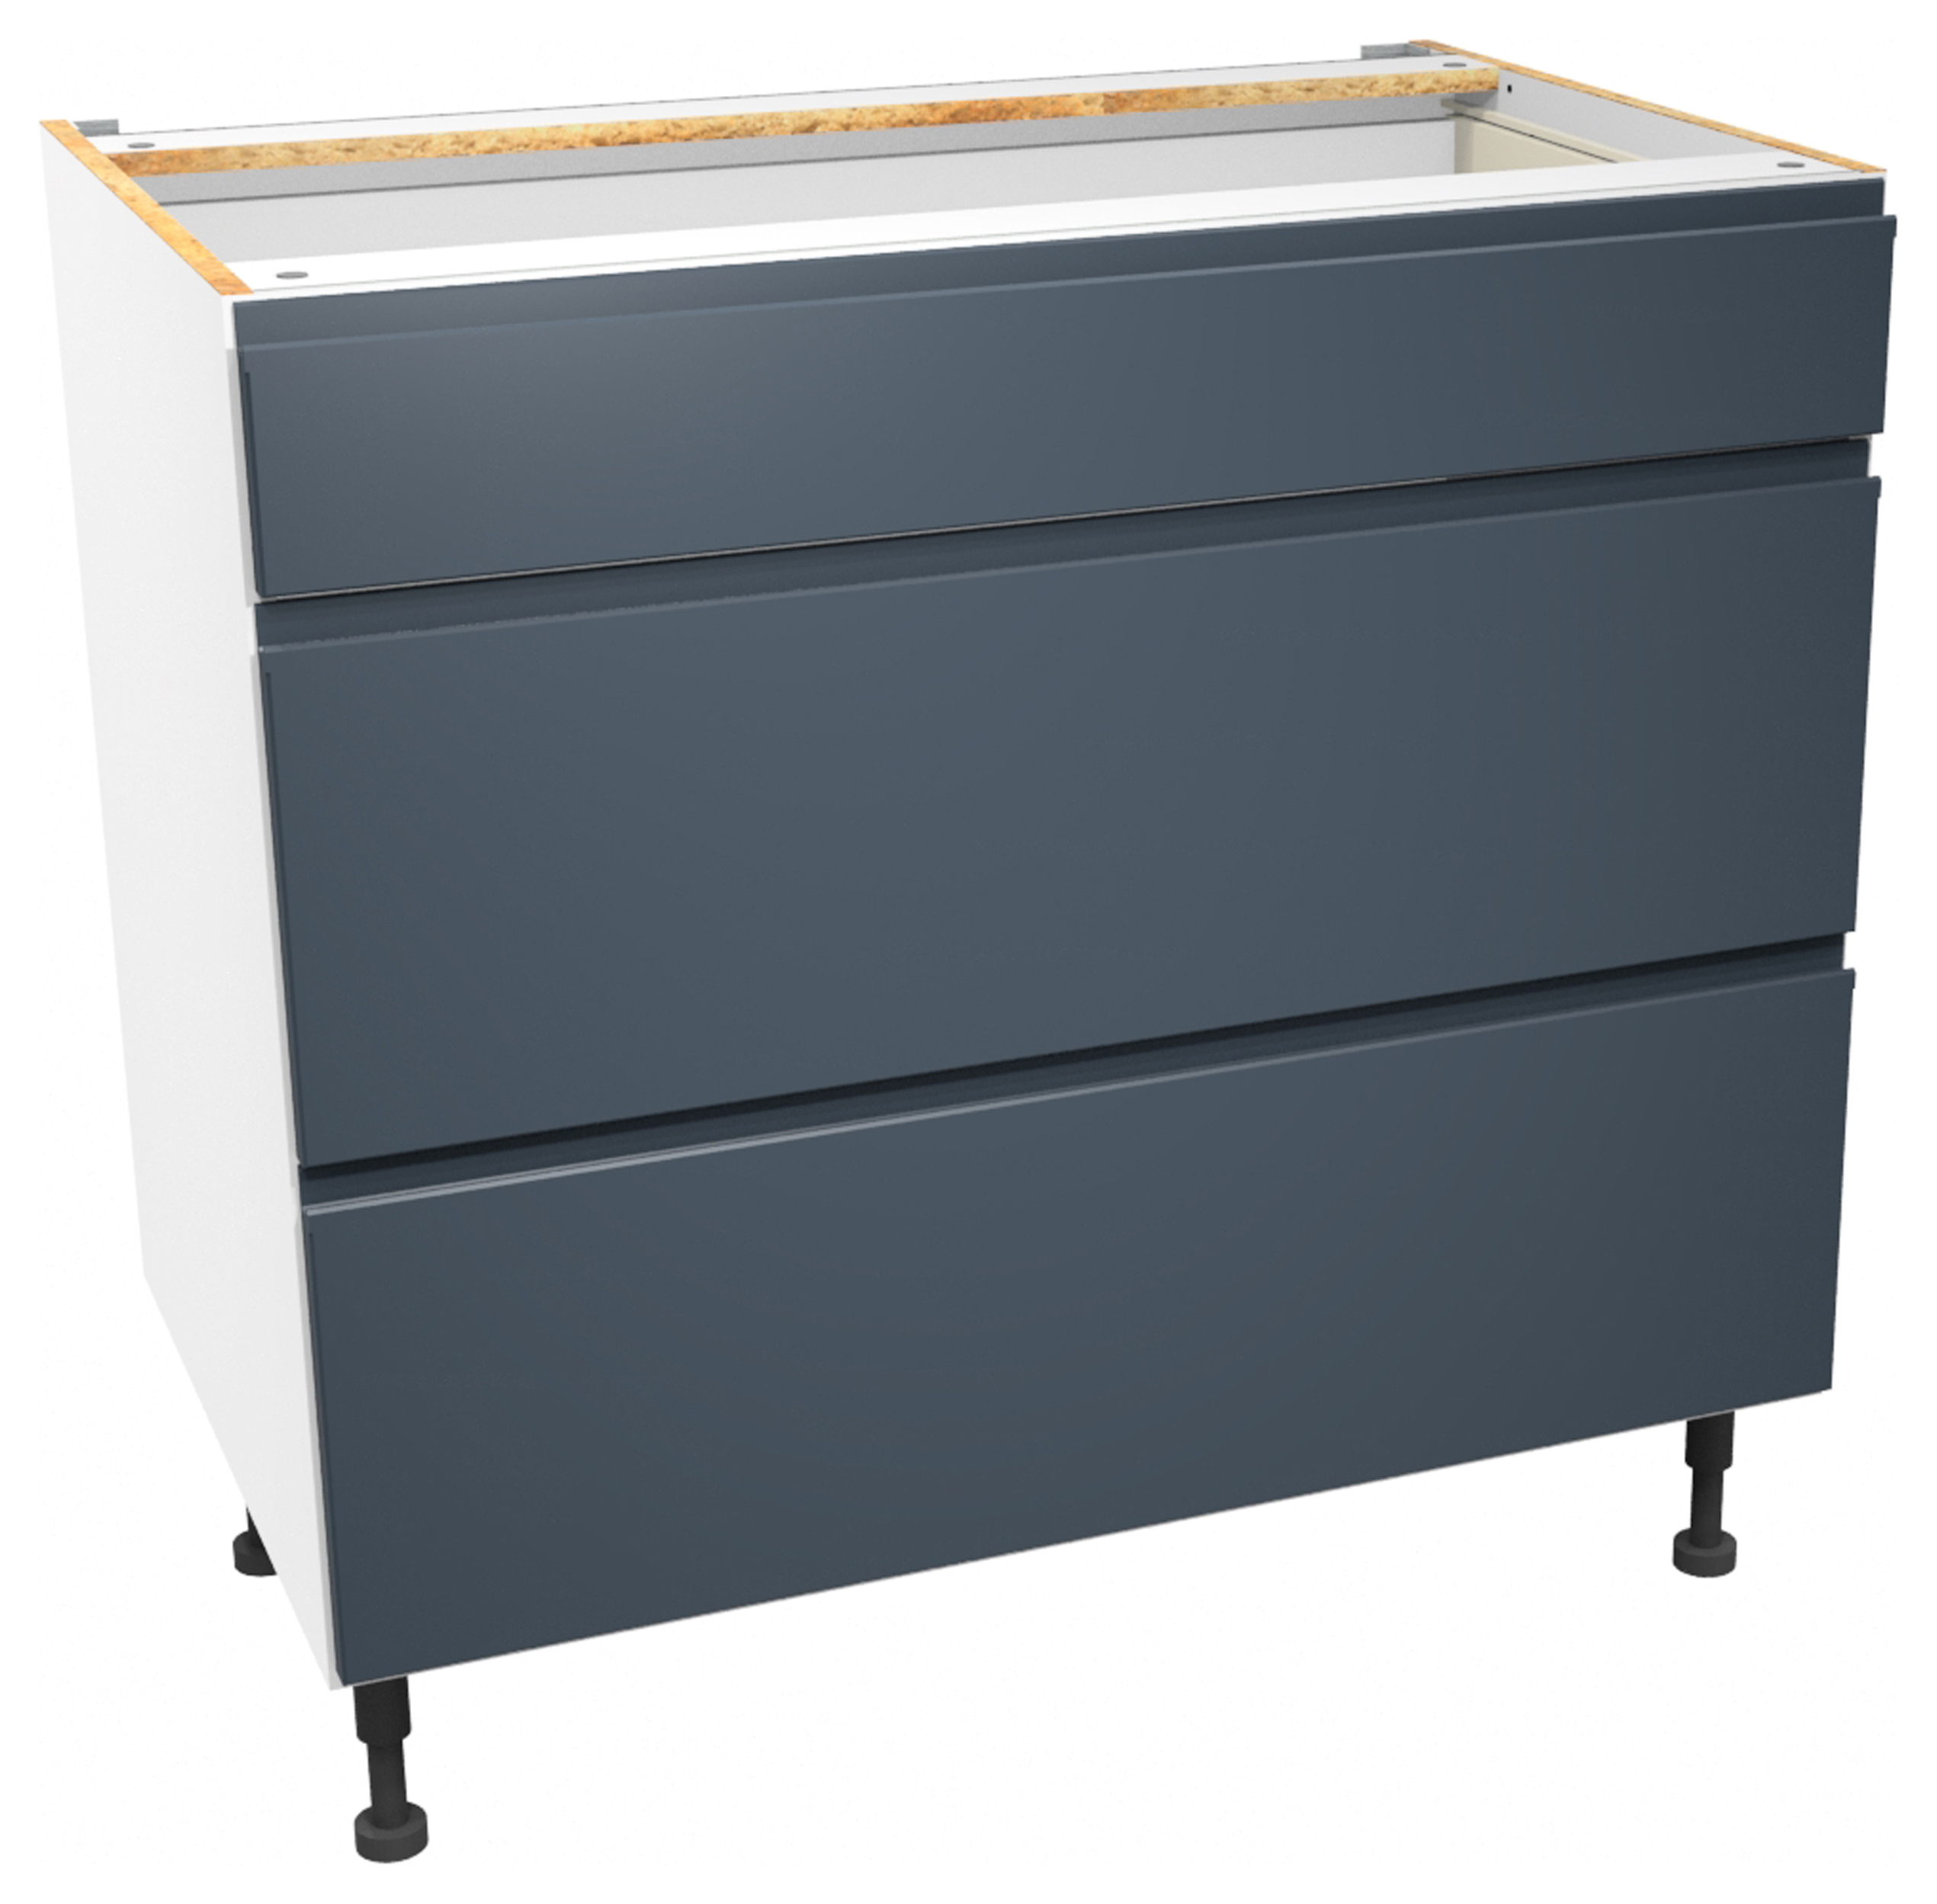 Image of Wickes Madison Marine Blue Drawer Unit - 900mm (Part 1 of 2)